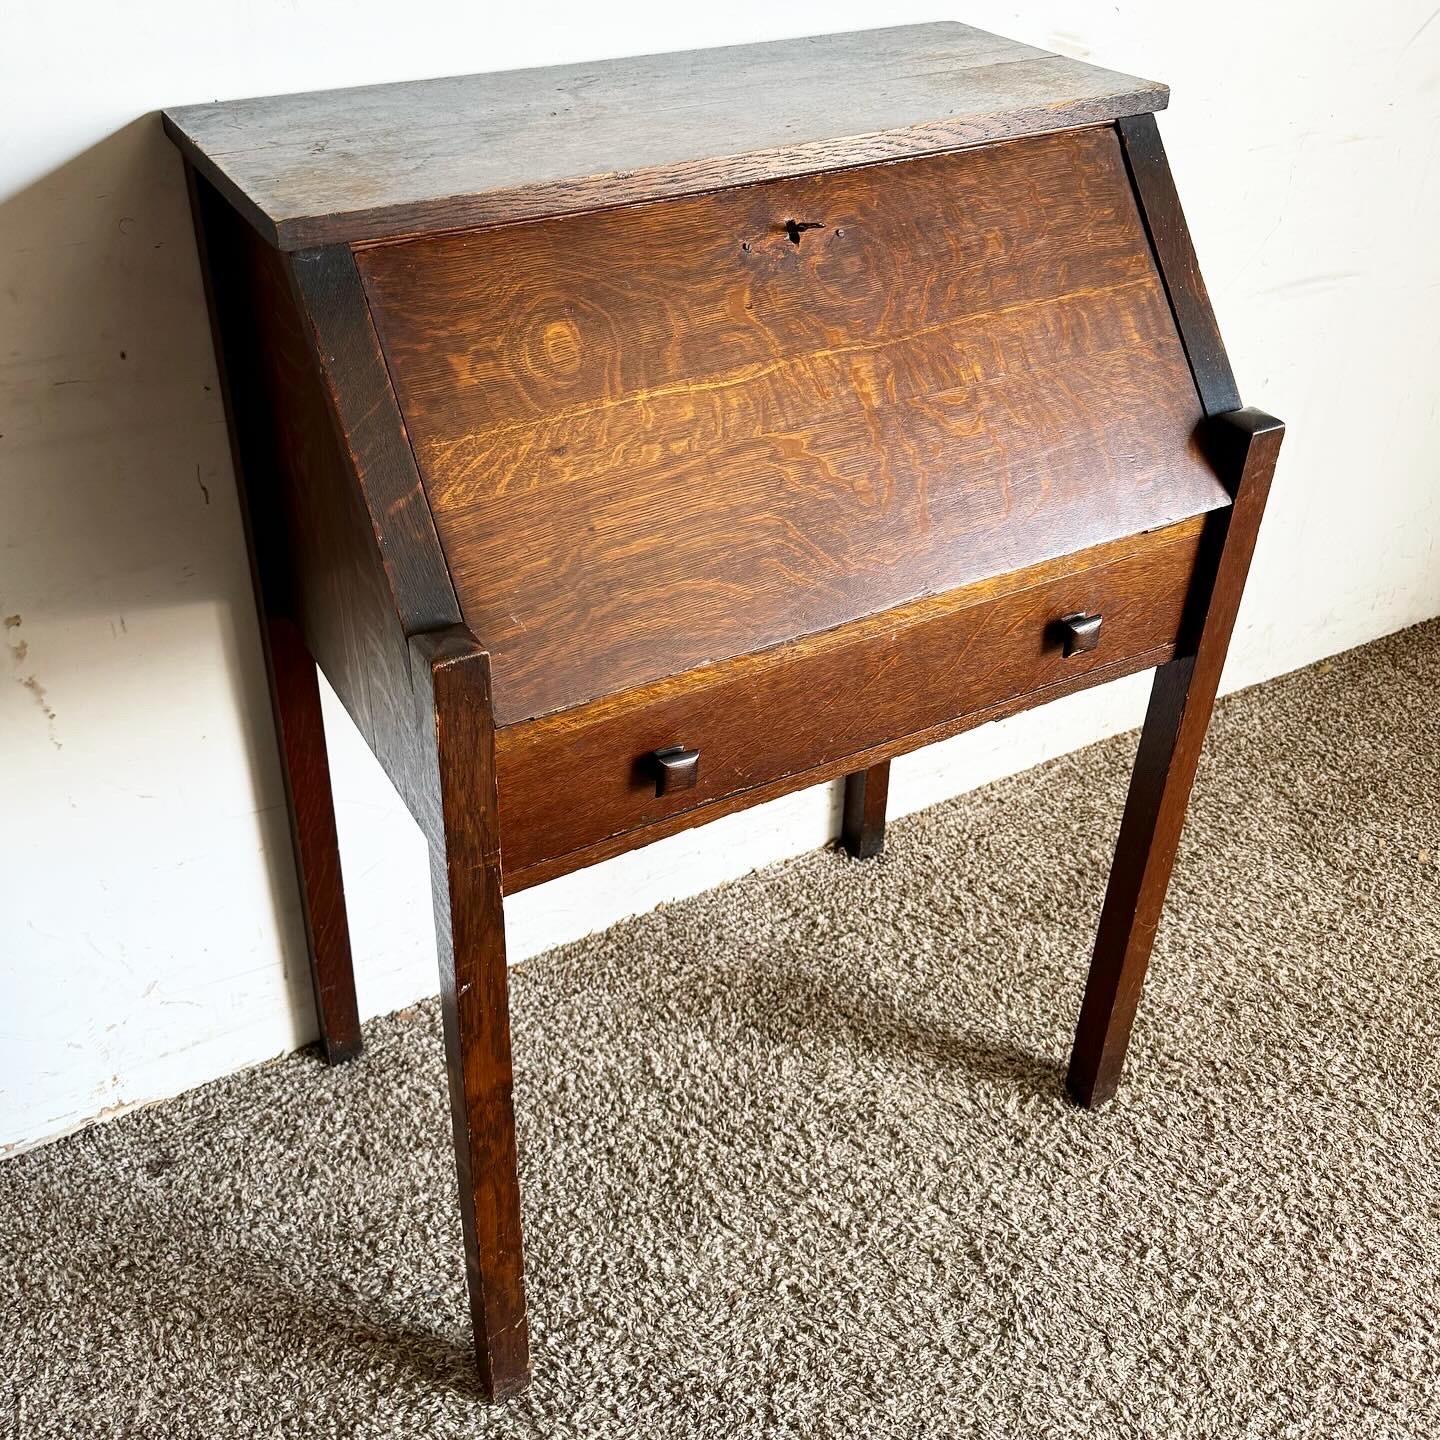 Discover the timeless elegance of the Antique Tiger Oak Secretary Desk by Danner, featuring exquisite craftsmanship, functionality, and historic charm for your office or study space.
Vintage pieces may have age-related wear. Review photos carefully,